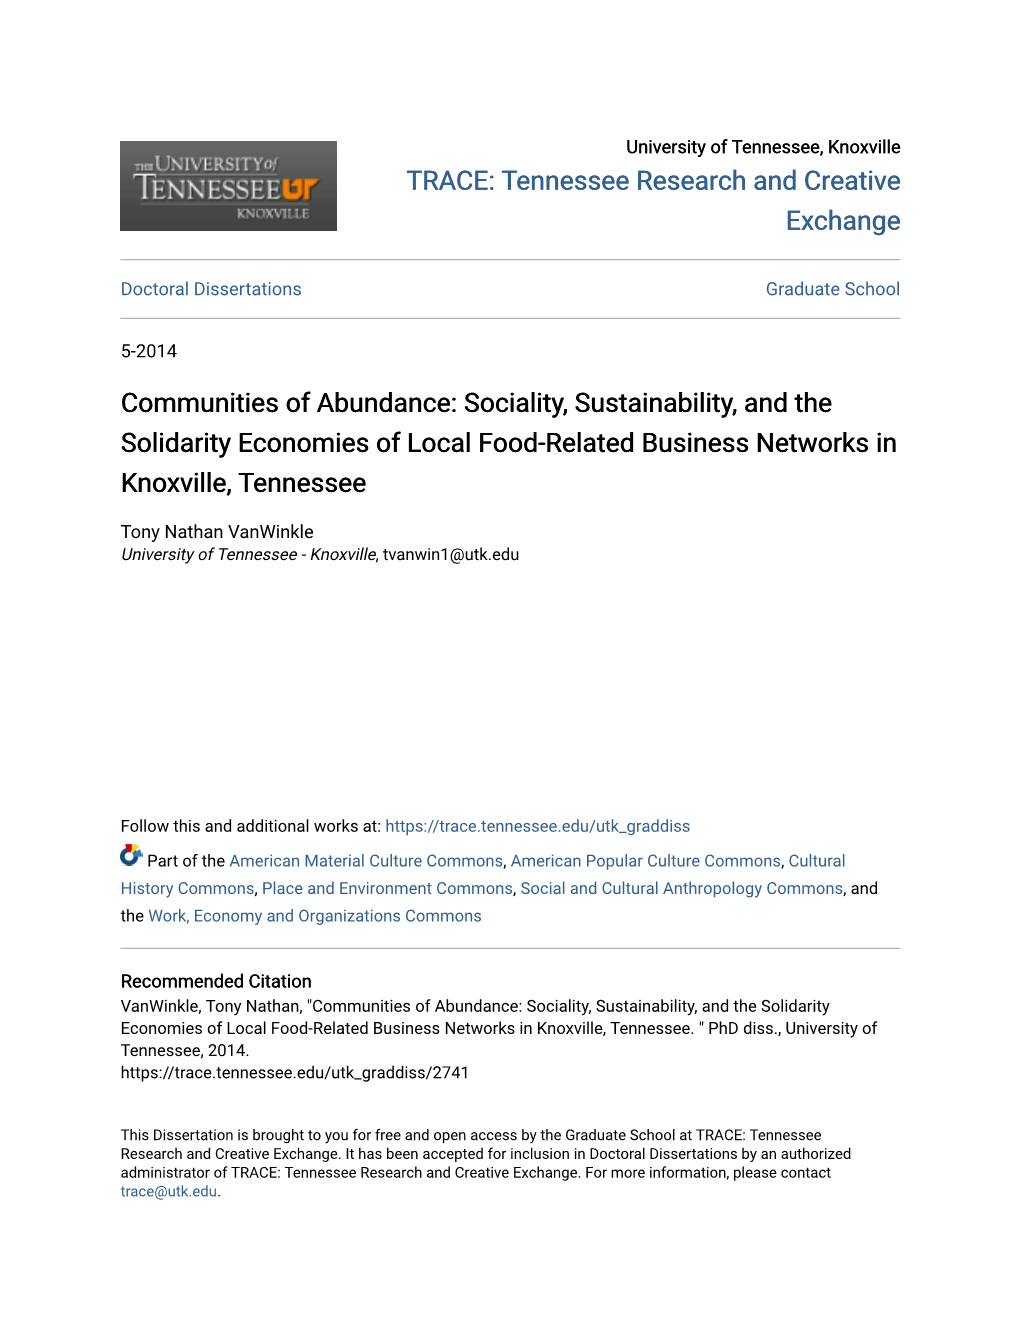 Sociality, Sustainability, and the Solidarity Economies of Local Food-Related Business Networks in Knoxville, Tennessee